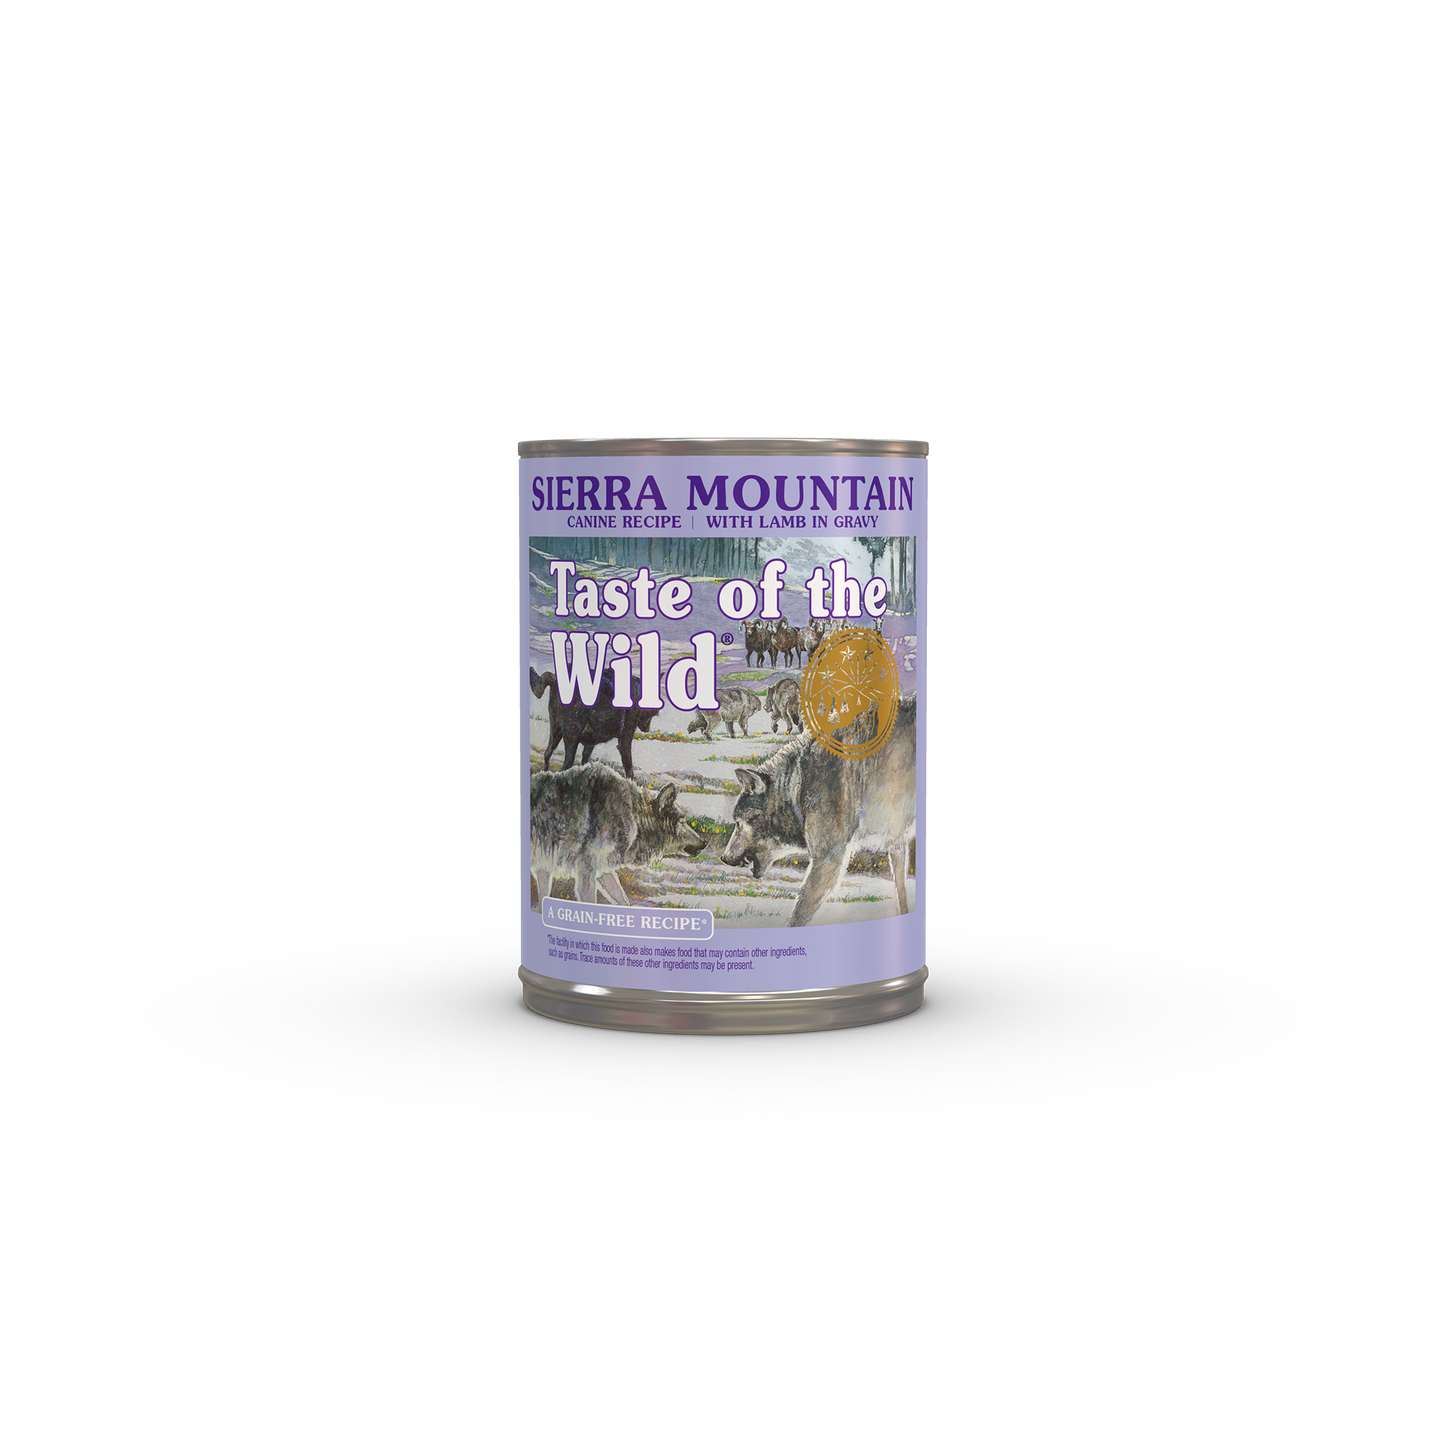 Taste of the Wild Sierra Mountain Canine Recipe With Lamb in Gravy, Wet Dog Food, 13.2-oz Case of 12